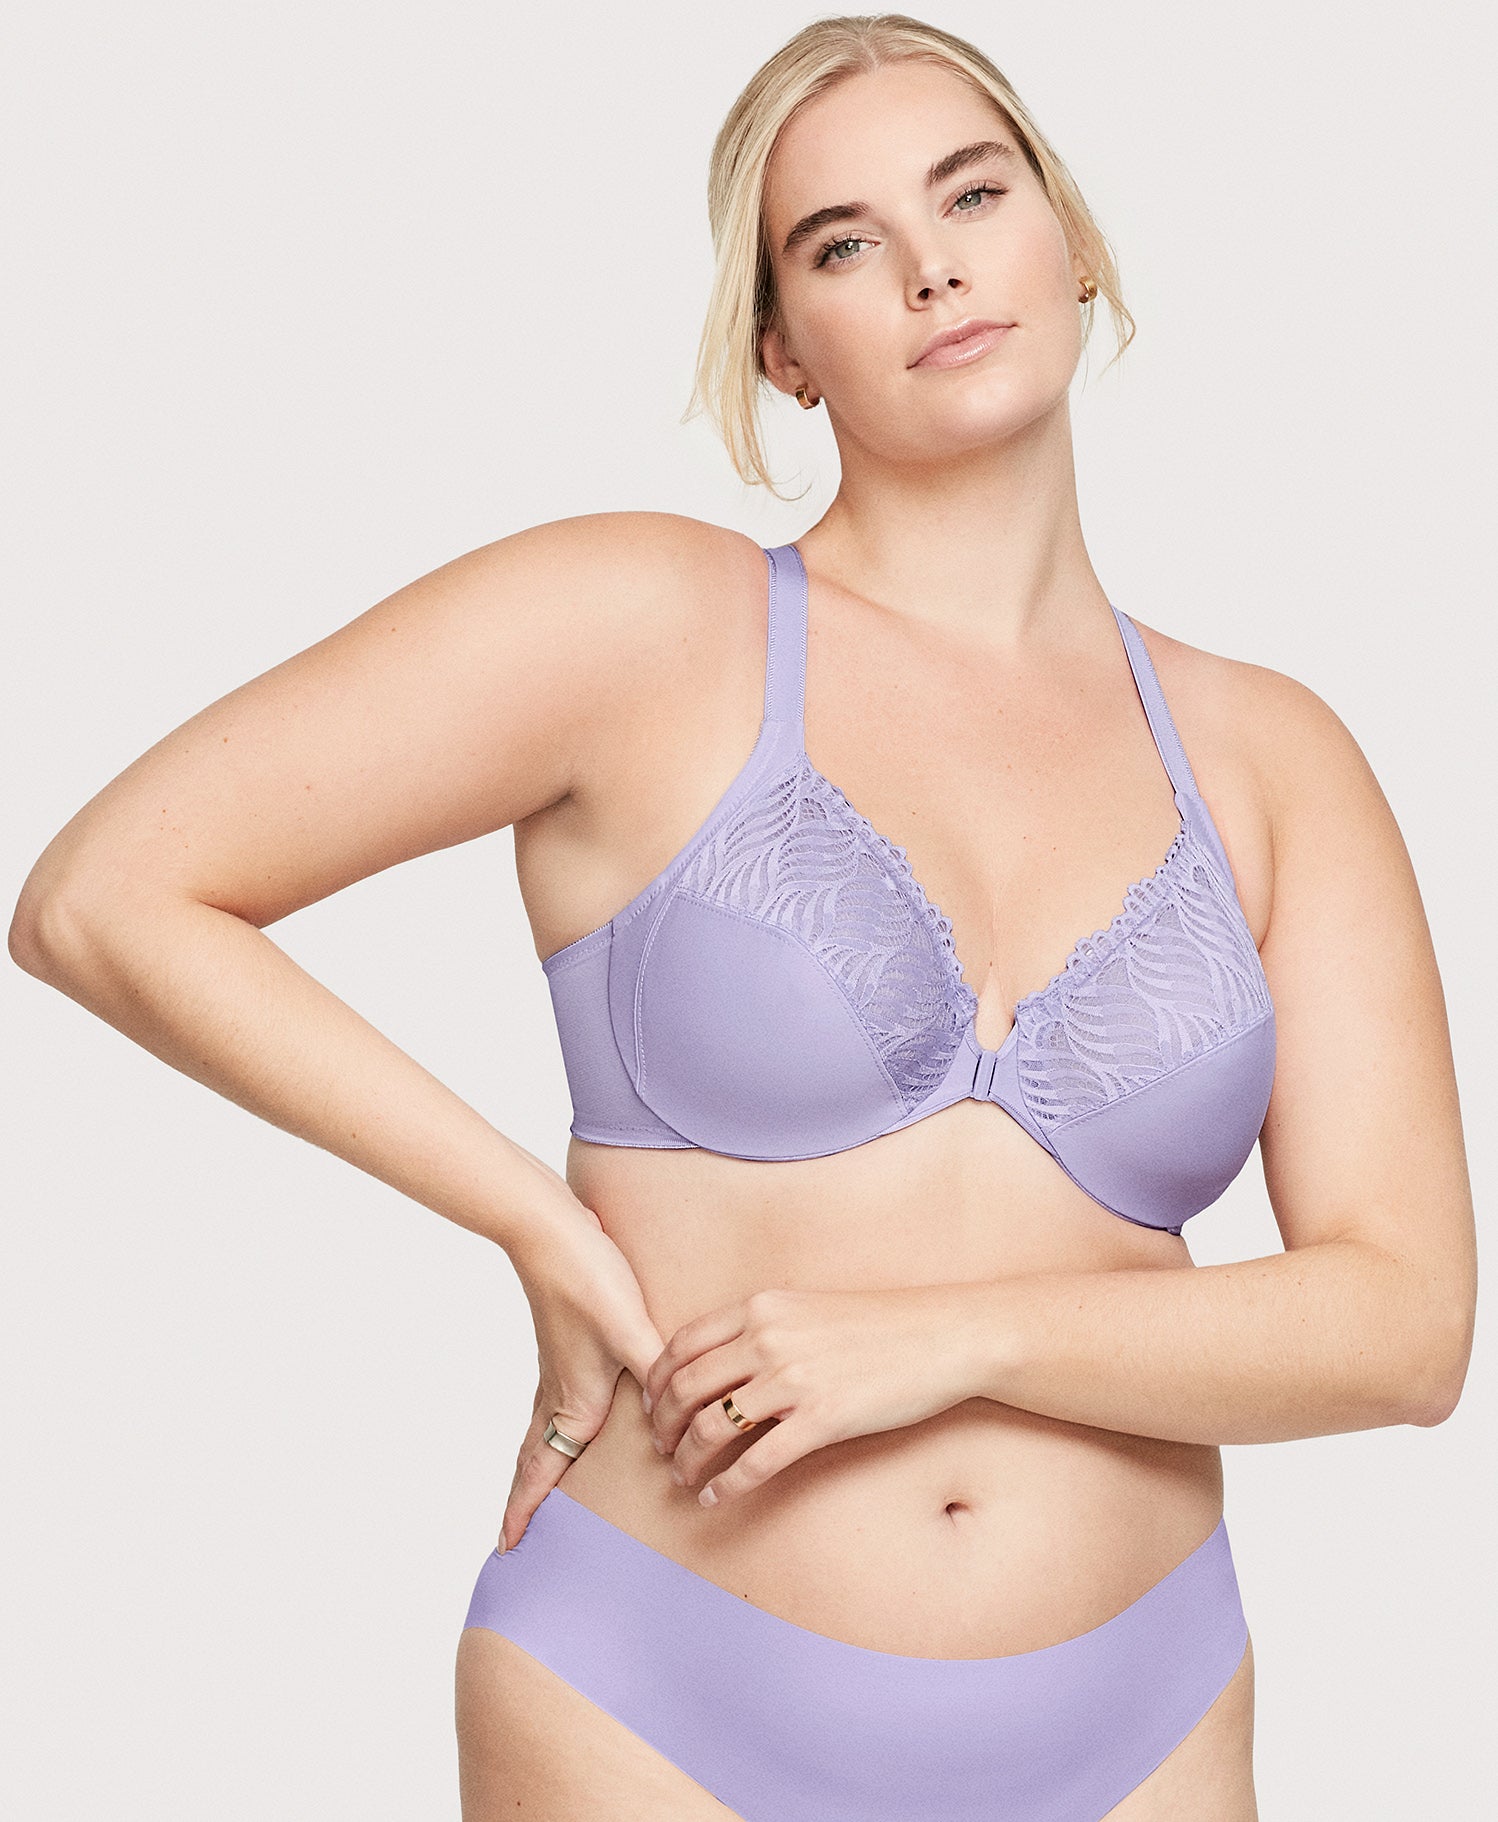 Why this is one of my Favourite Bras? The Front-Closure T-Back WonderWire  Bra offers incredible shape & comfort! Try it in sizes 34-44 C